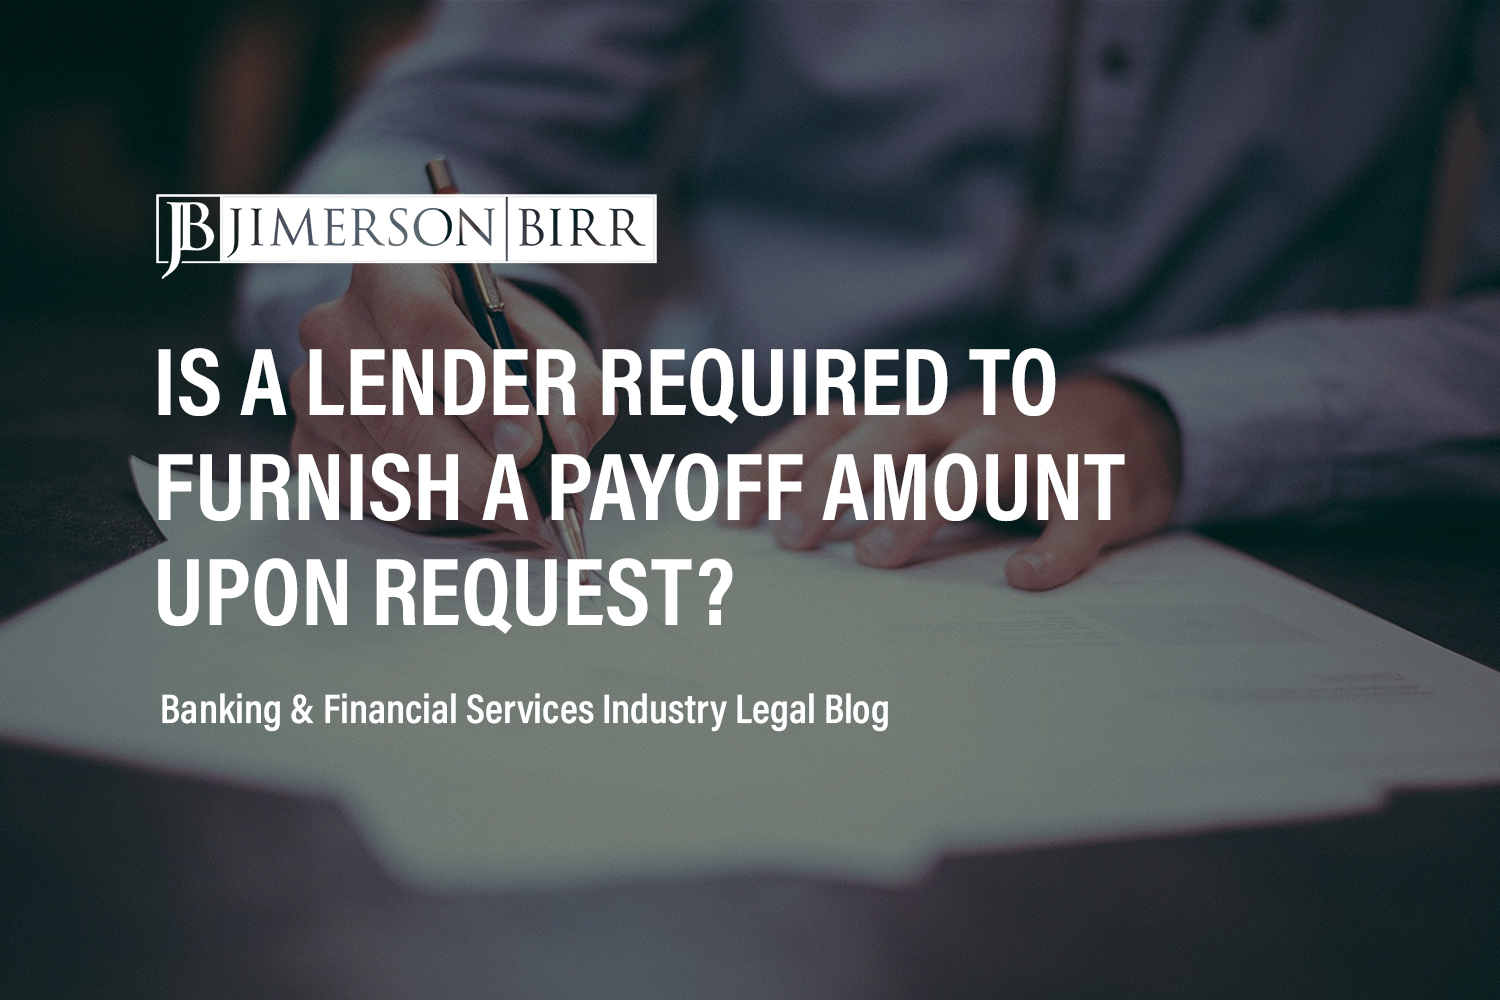 Is a Lender Required to Furnish a Payoff Amount Upon Request?